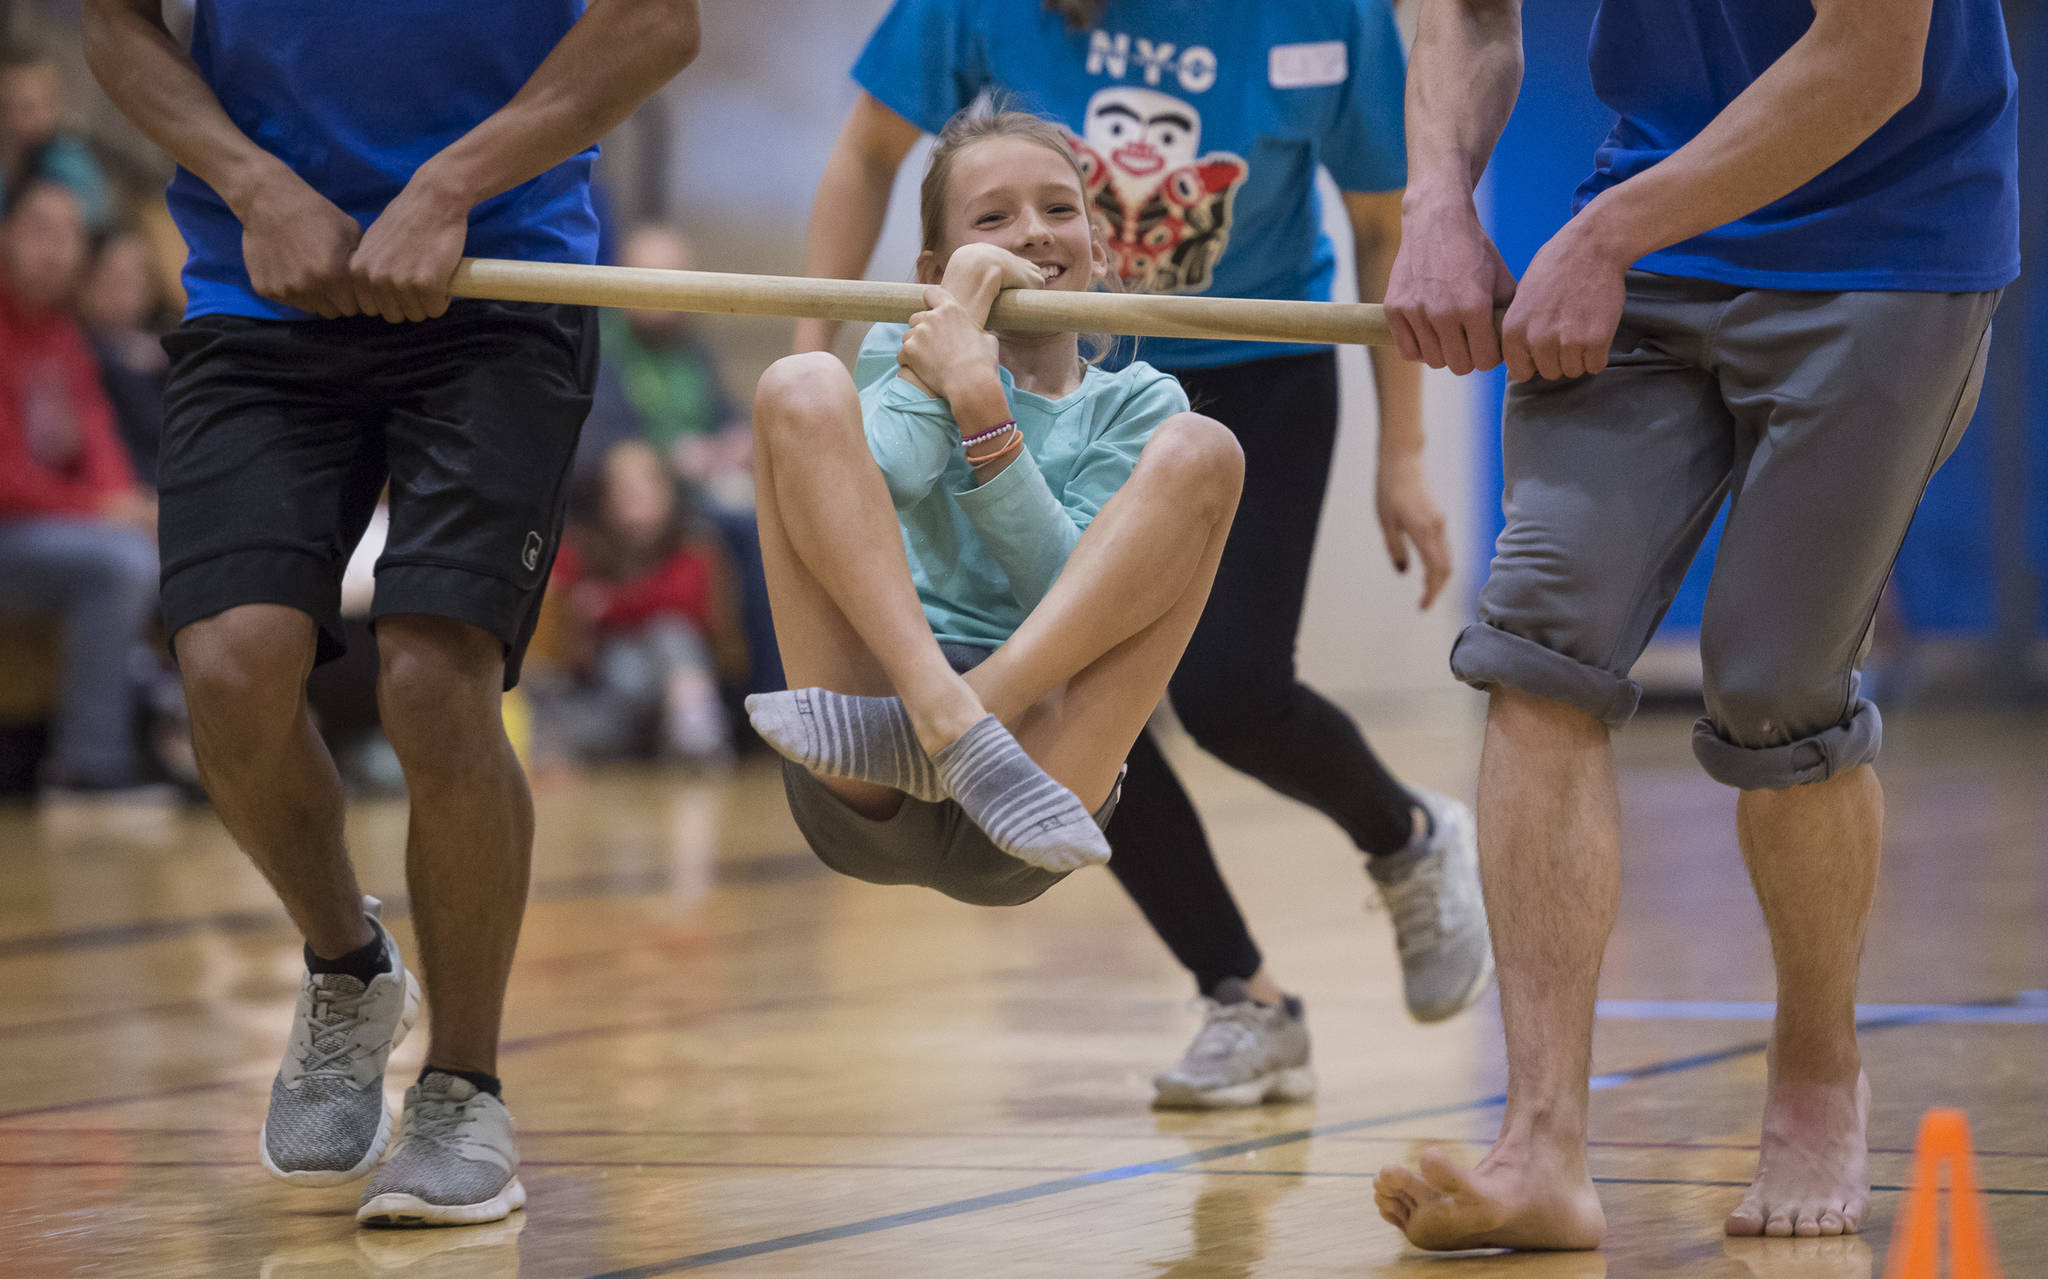 Rayna Tuckwood, 11, participates in the wrist carry at the Native Youth Olympics 2018 Traditional Games at the University of Alaska Southeast Recreational Center on Friday, March 30, 2018. Tuckwood won the event for middle school students. (Michael Penn | Juneau Empire)